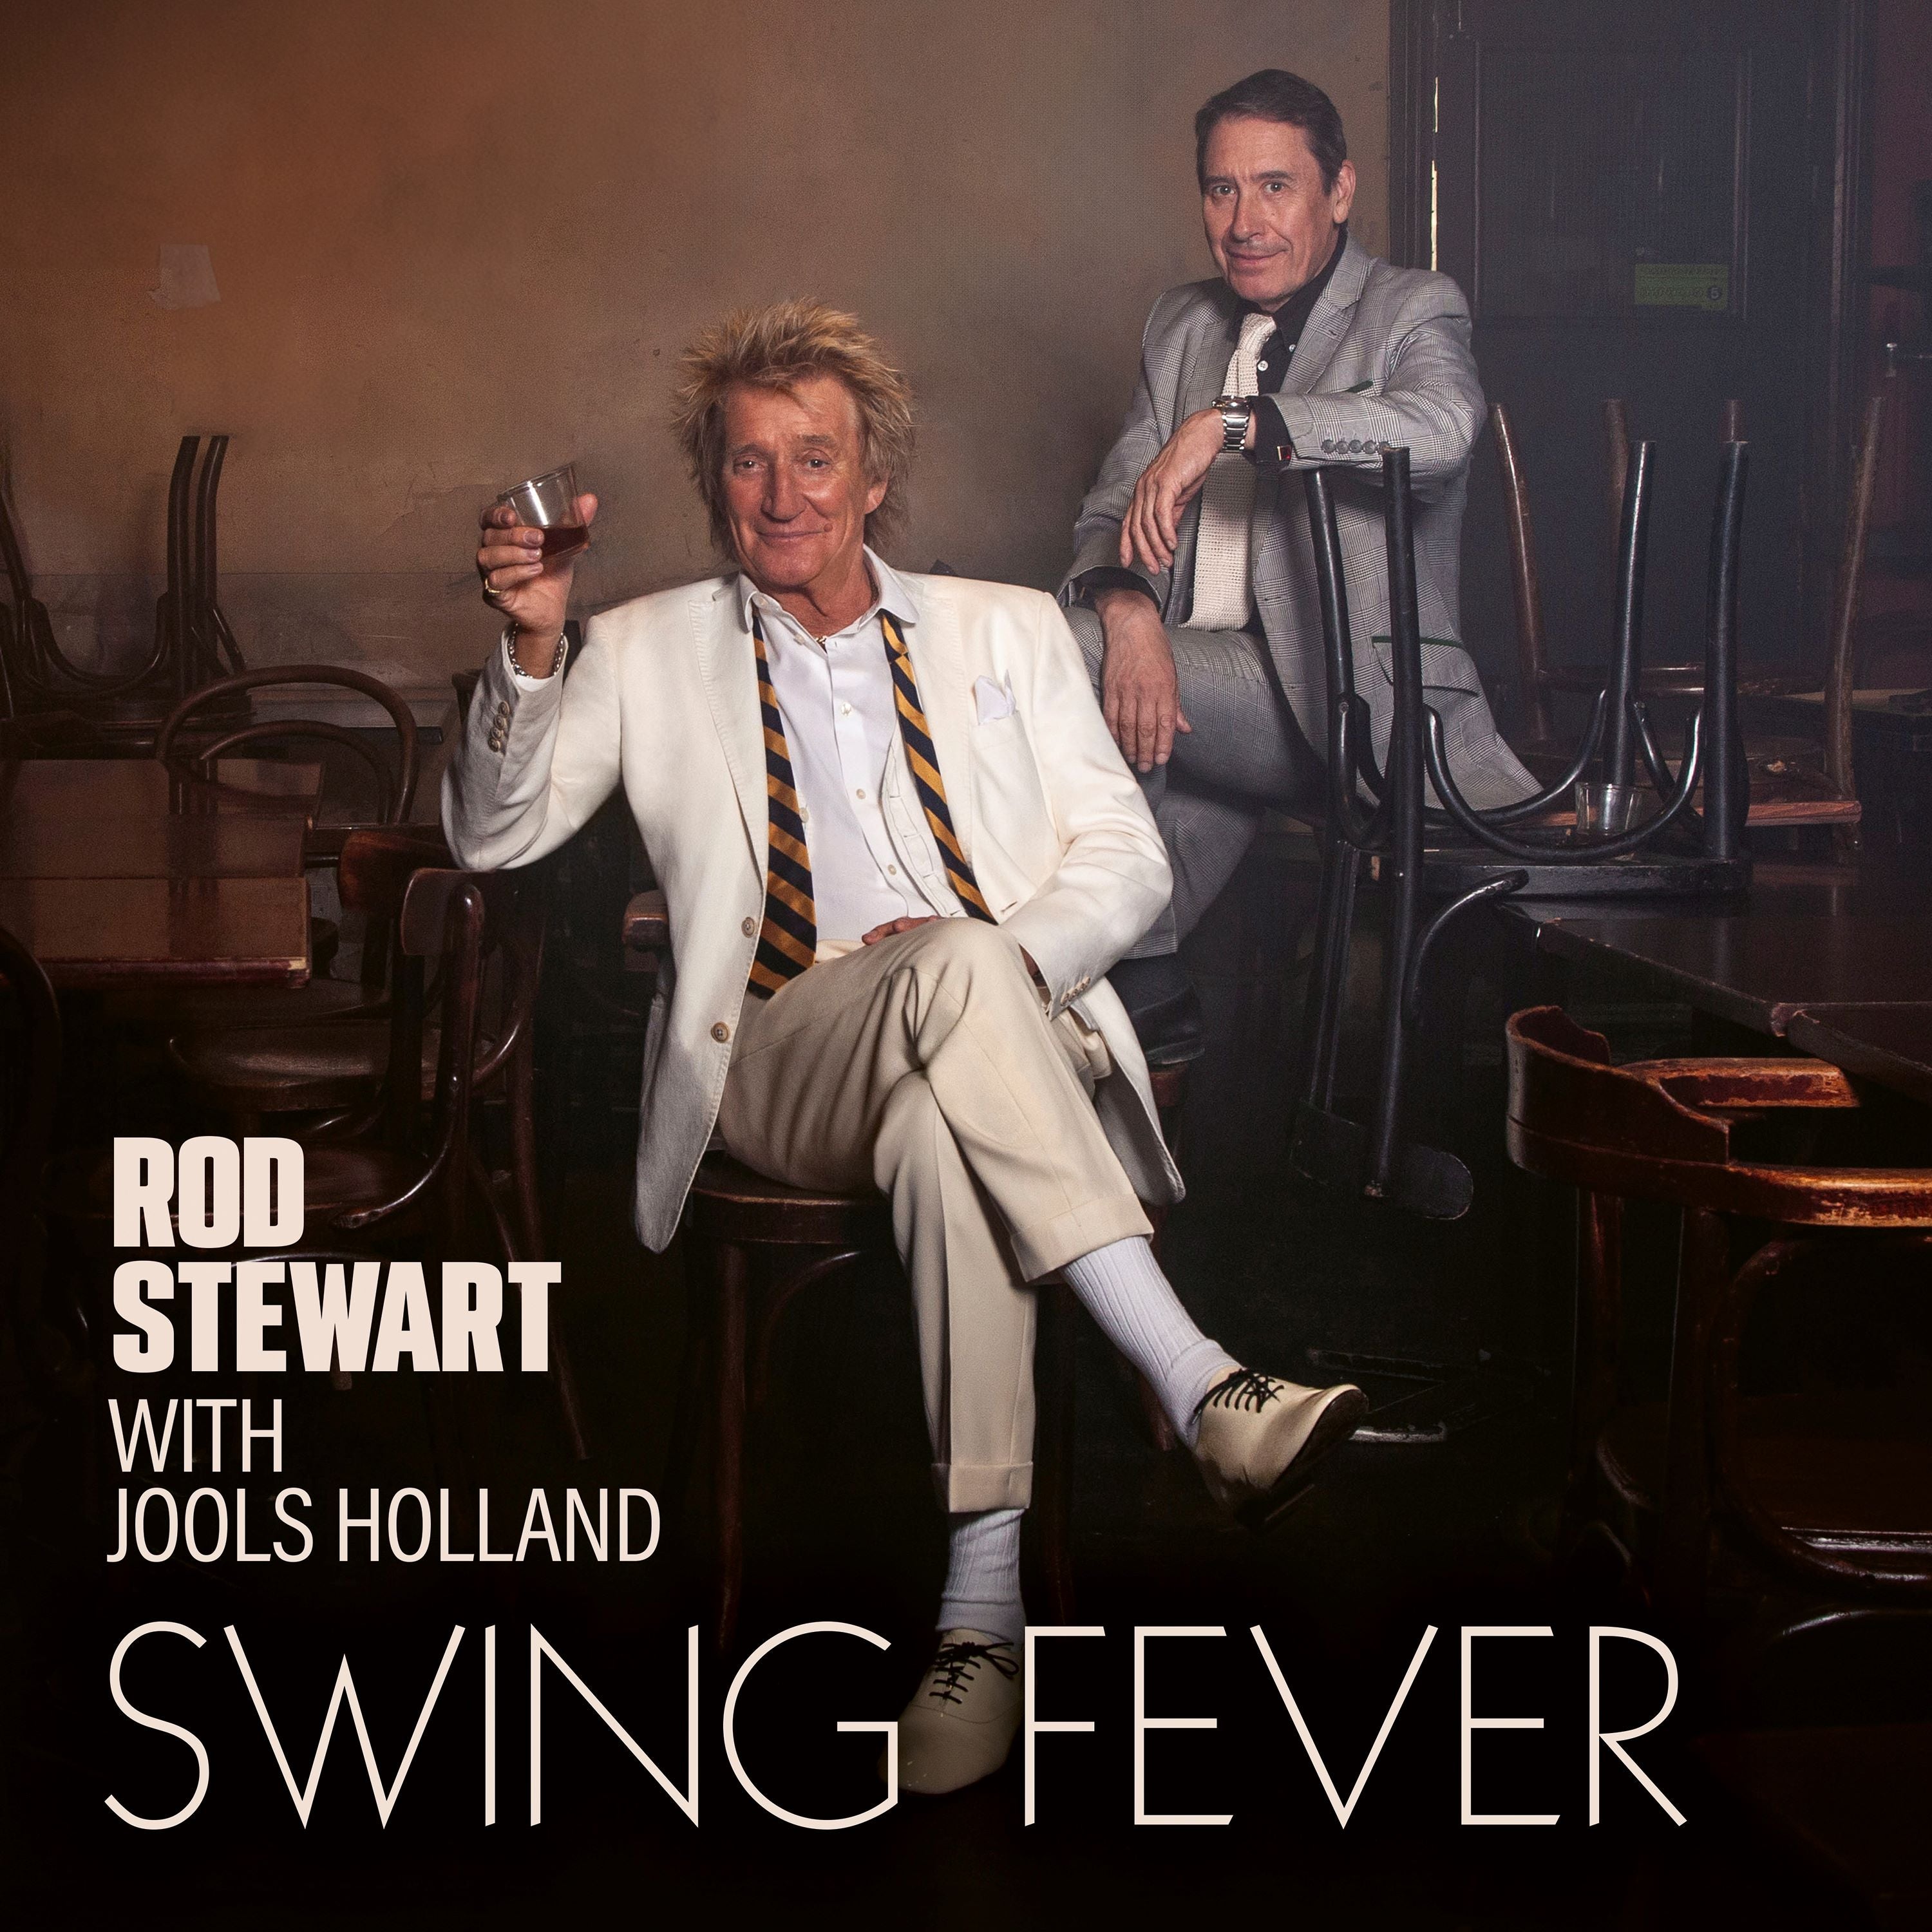 Rod Stewart with Jools Holland - Swing Fever: CD